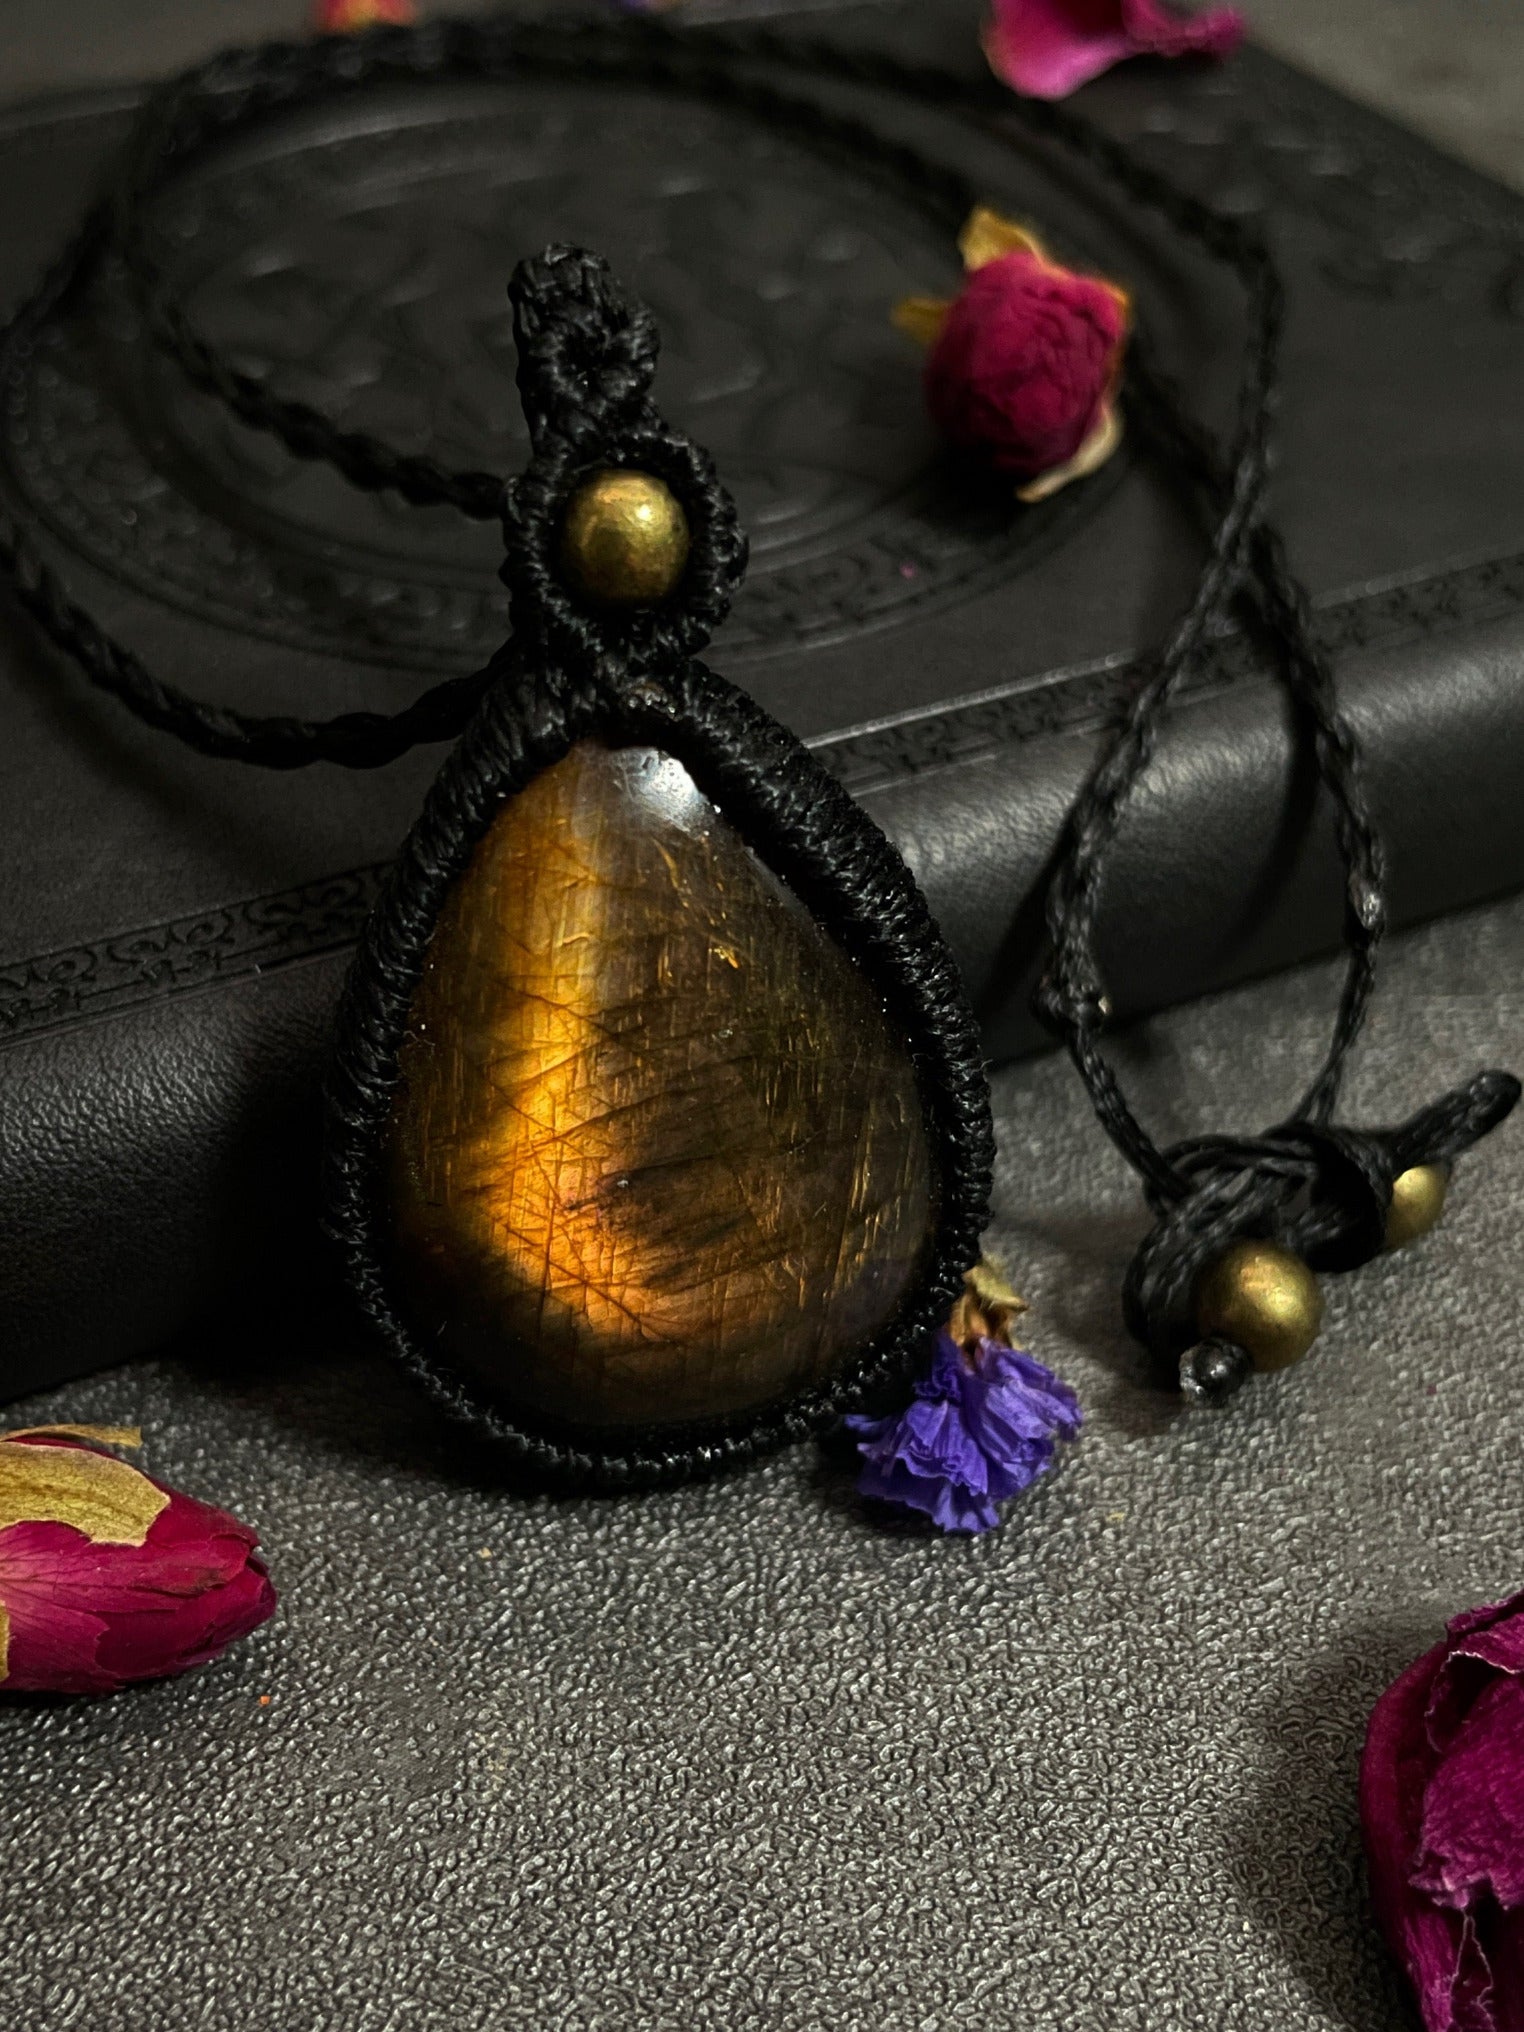 Pictured is a labradorite cabochon wrapped in macrame thread. A gothic book and flowers are nearby.